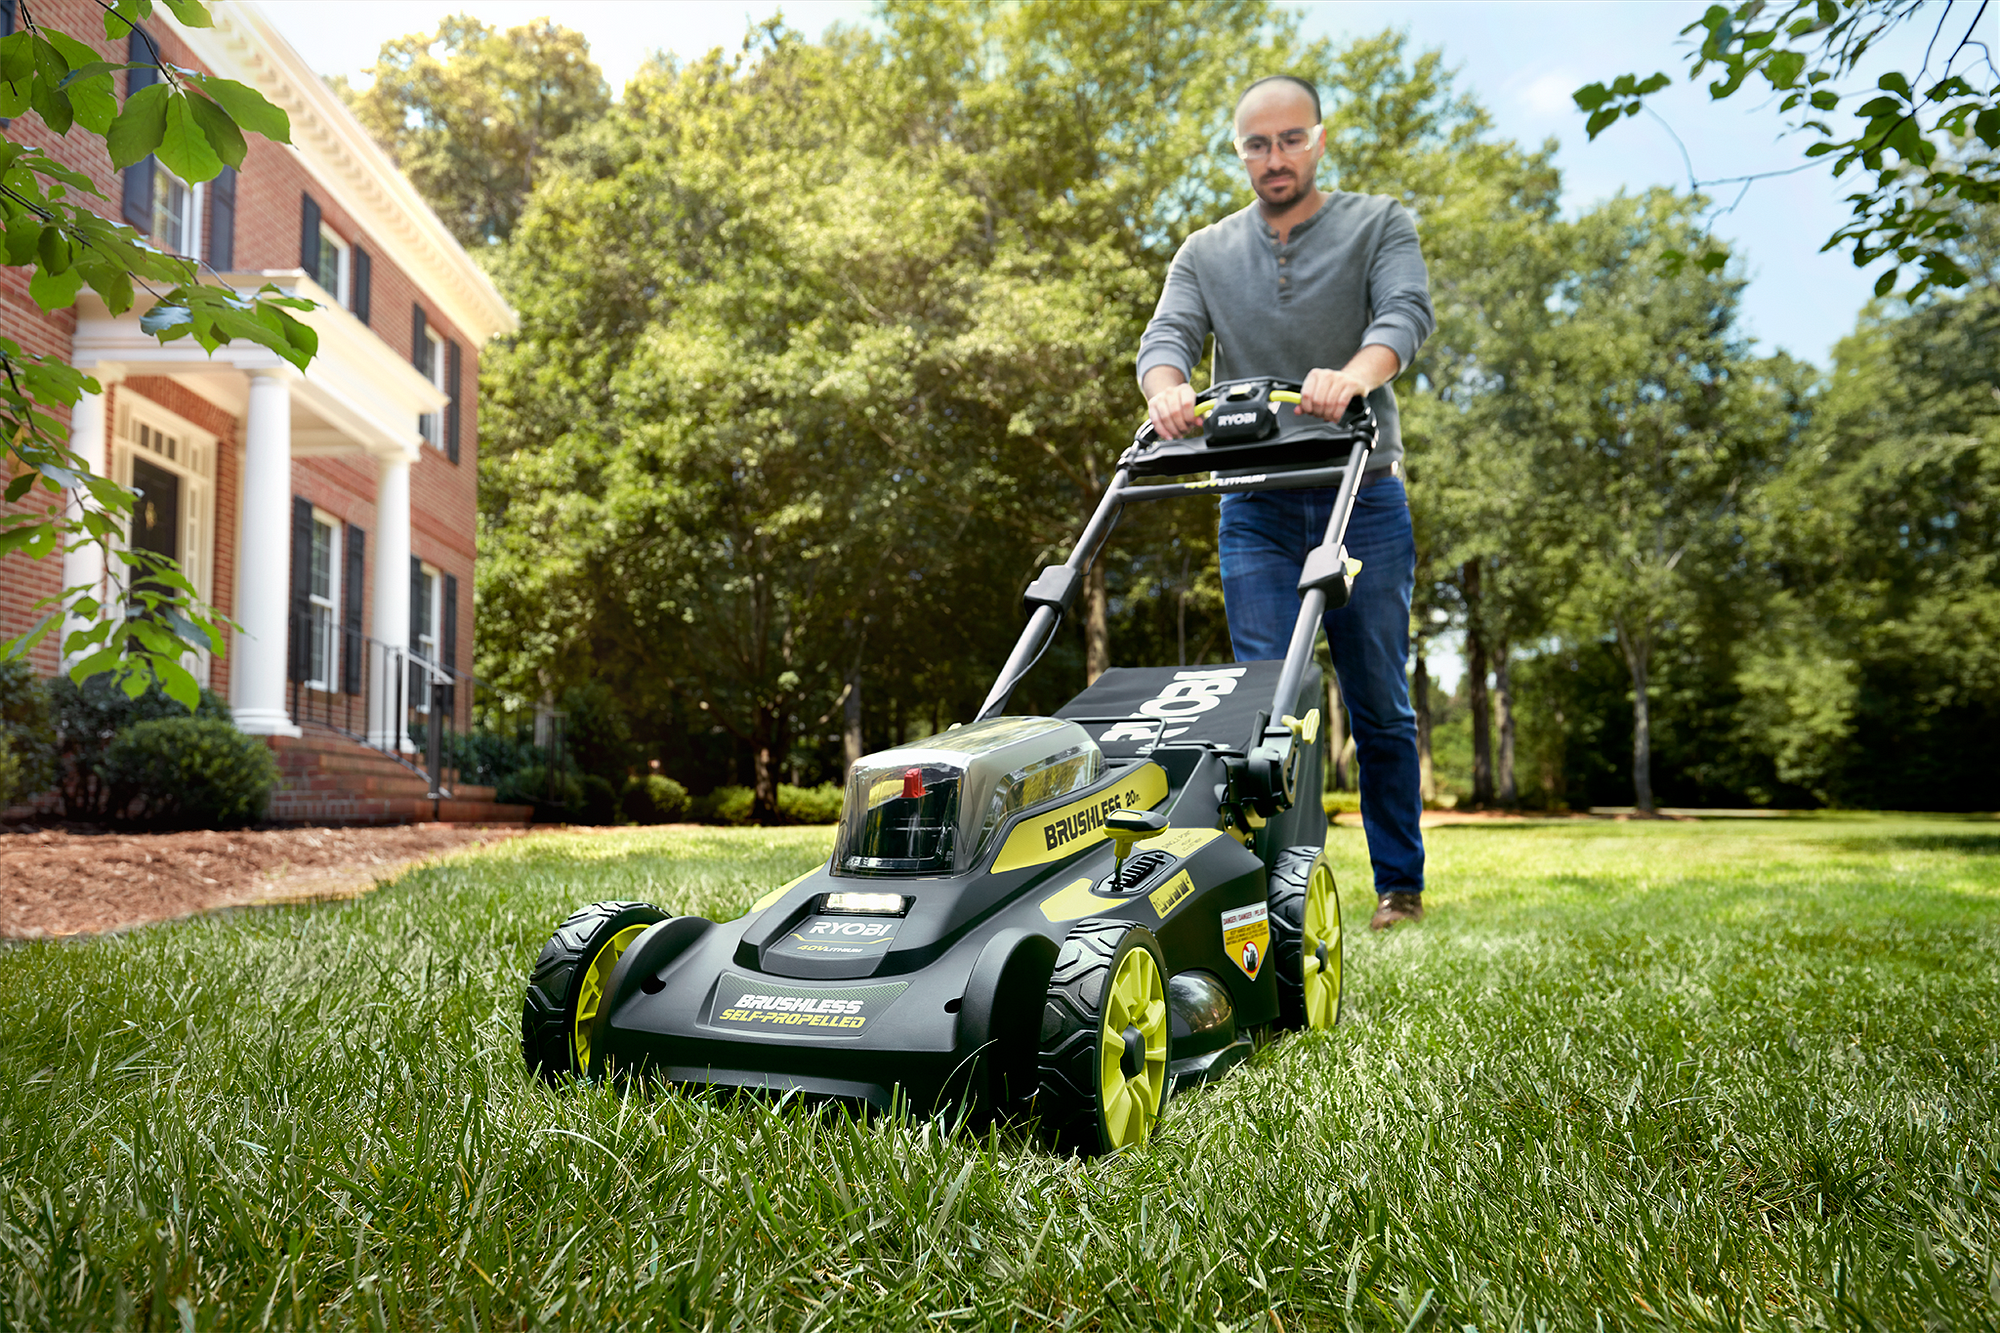 RYOBI 40V HP Brushless 20 in. Cordless Electric Battery Self-Propelled Lawn  Mower/String Trimmer w/(2) Batteries and Chargers RY401180-4X - The Home  Depot